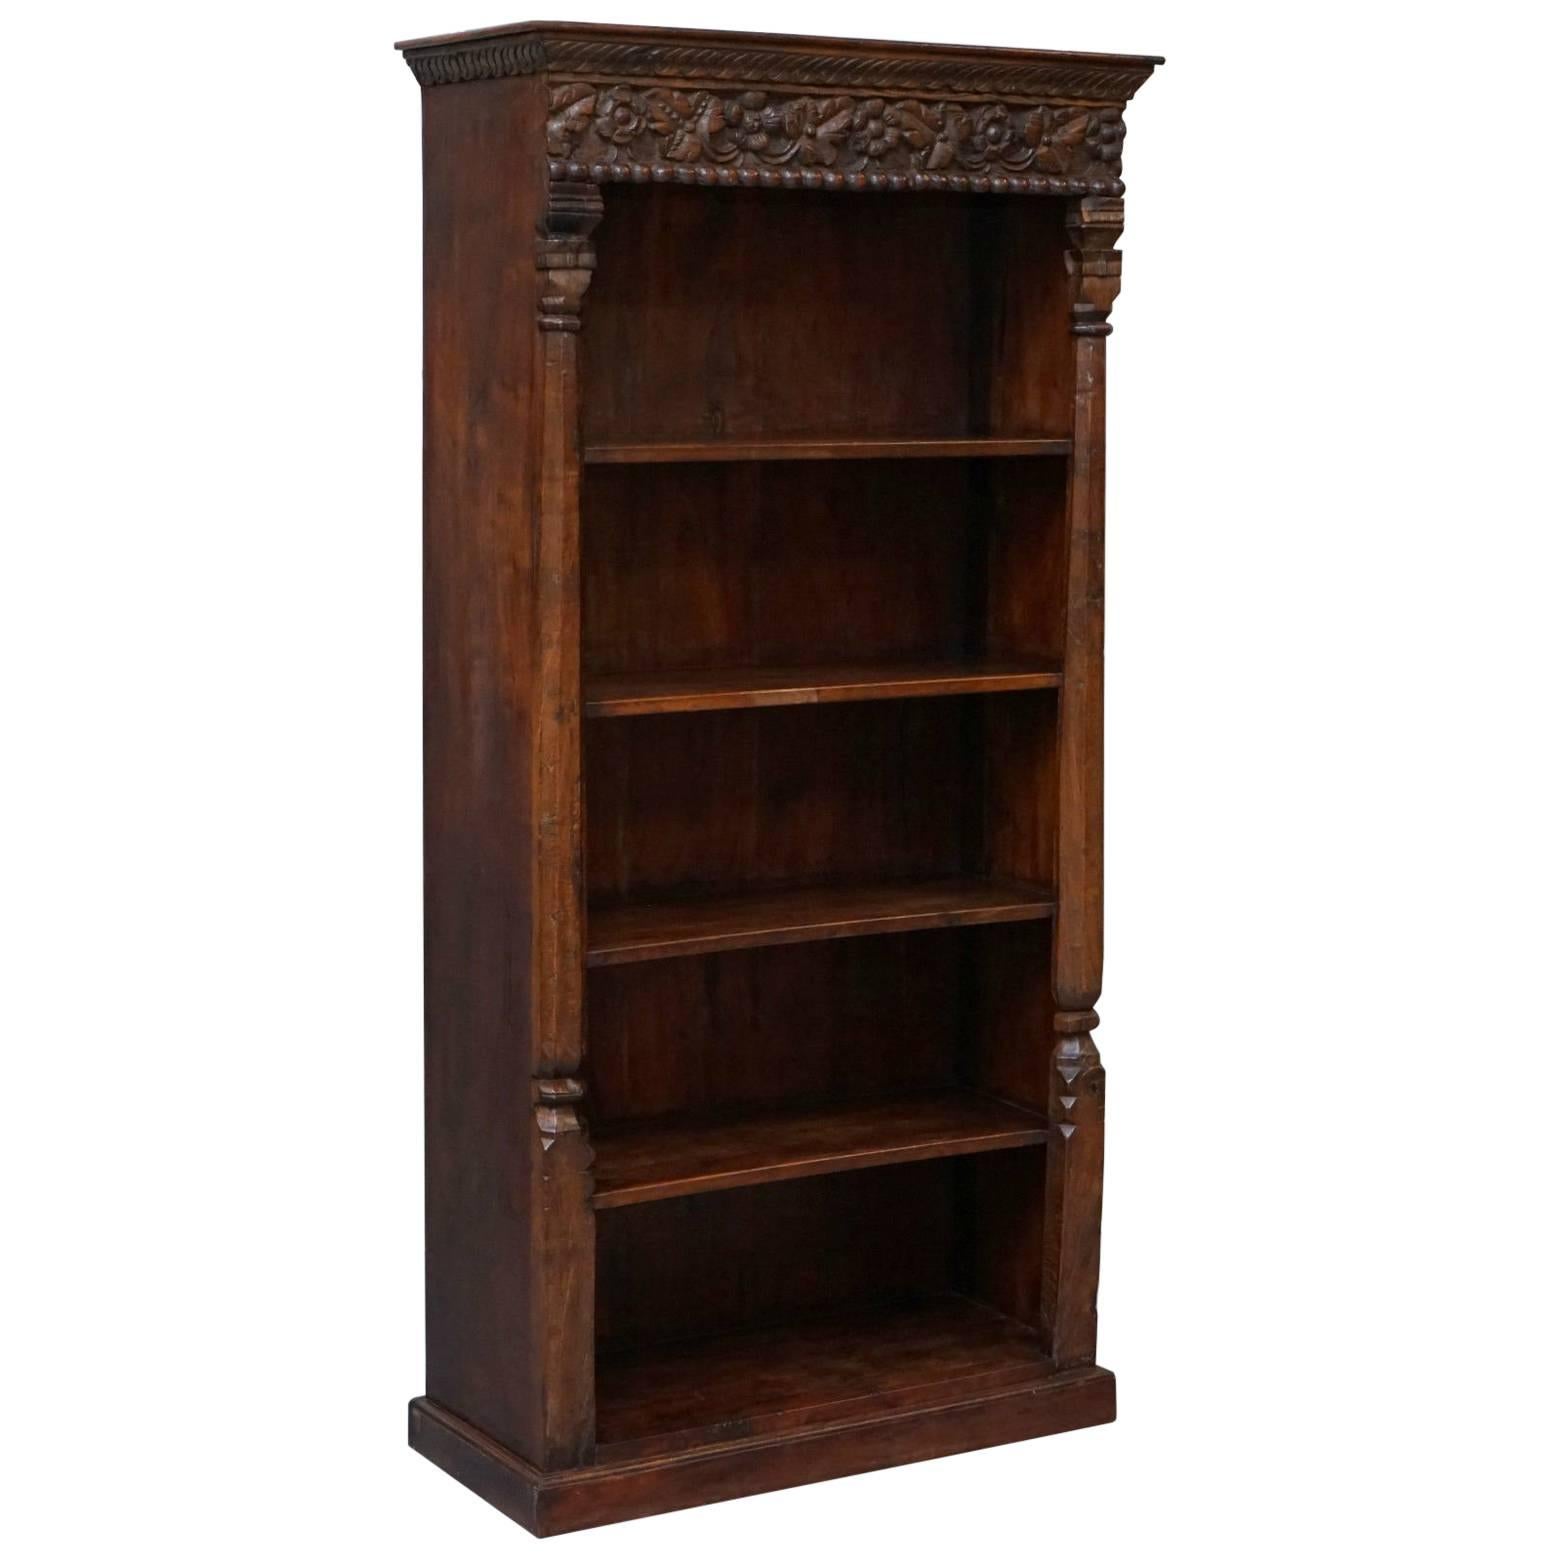 Solid Hand-Carved Teak Wood Bookcase, Extremely Heavy and Solid Well Made Piece